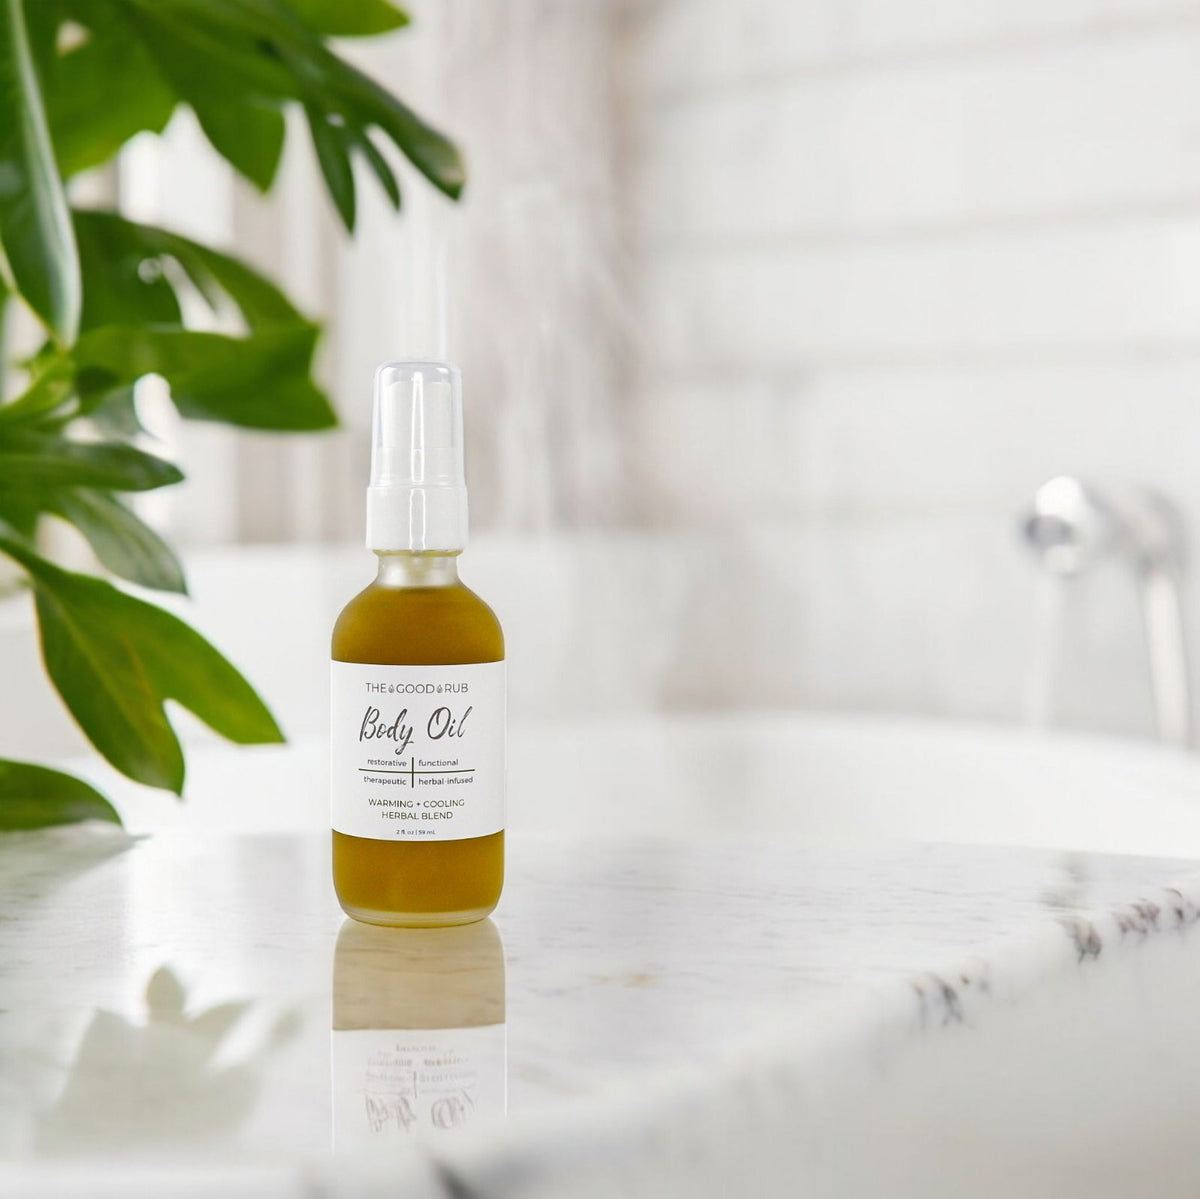 Warming + Cooling Body Oil - The Good Rub